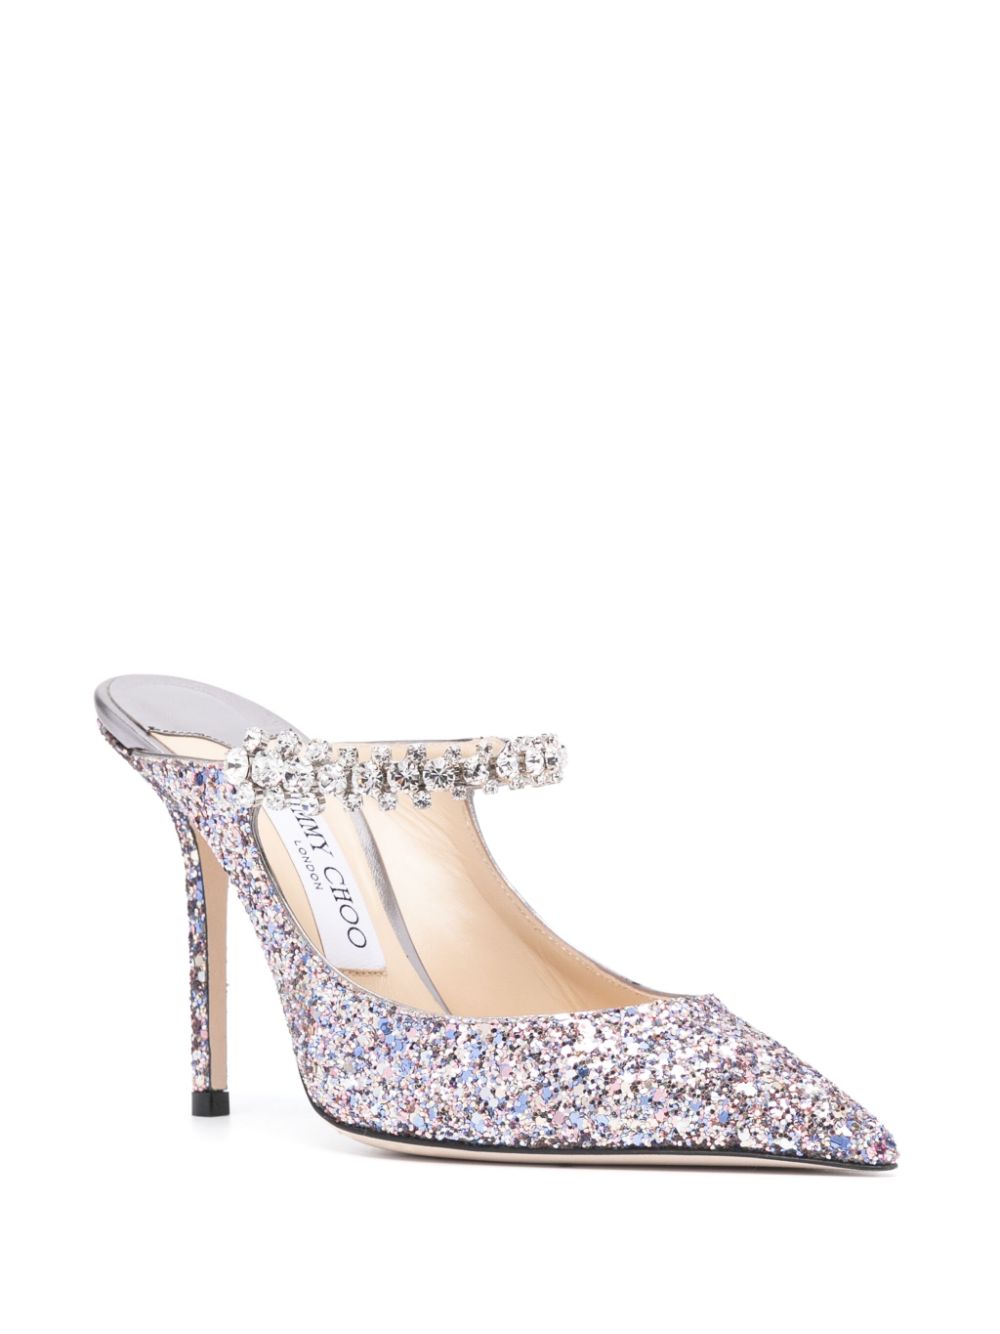 JIMMY CHOO Sparkle in Style with These Crystal Strap Glitter Heel Flats for Women